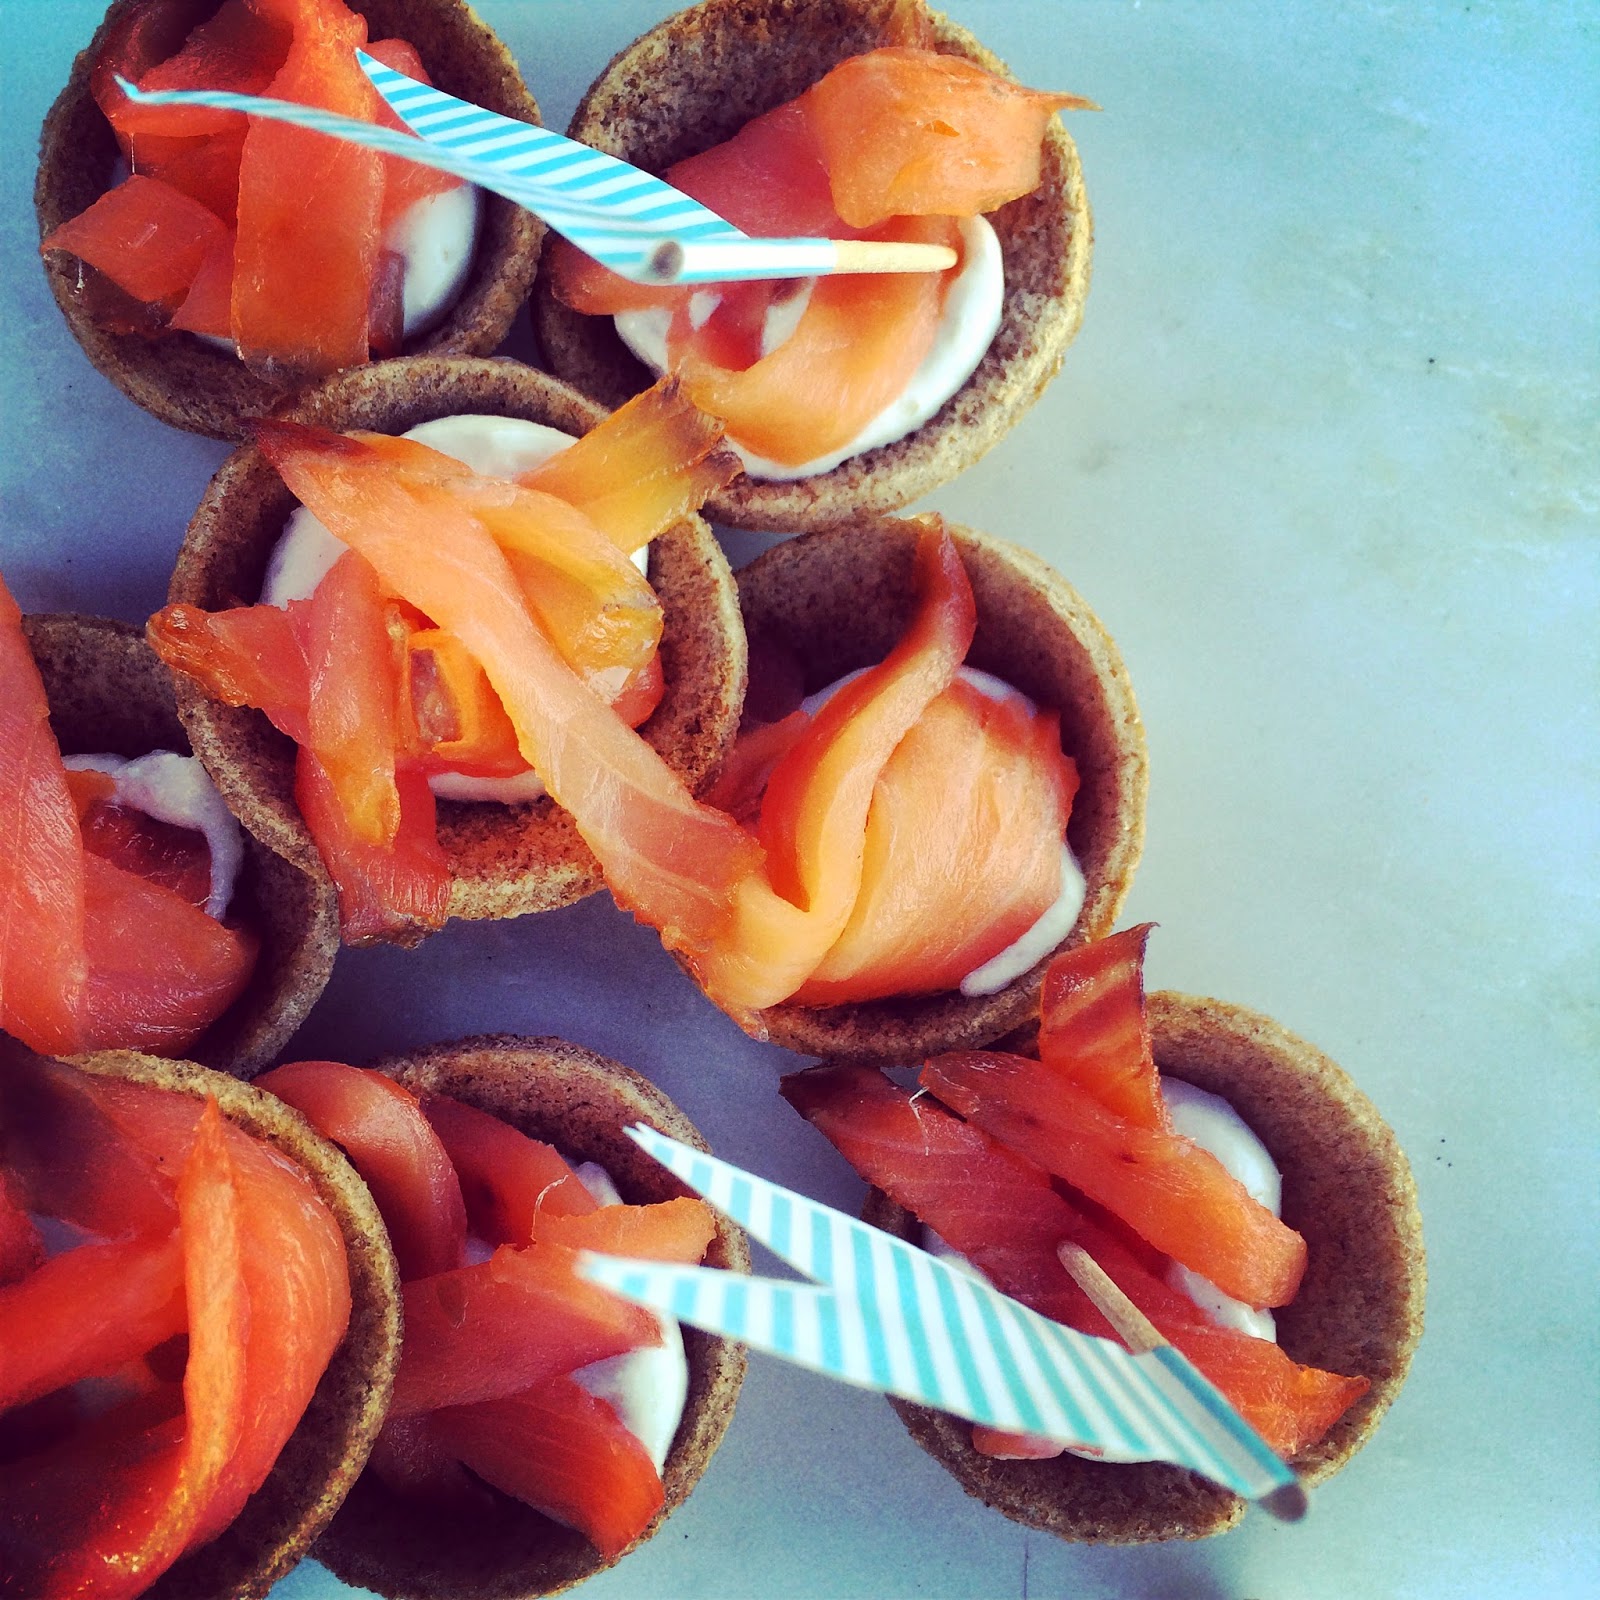 Brown Bread Cups with Smoked Salmon and Horseradish Cream Canape